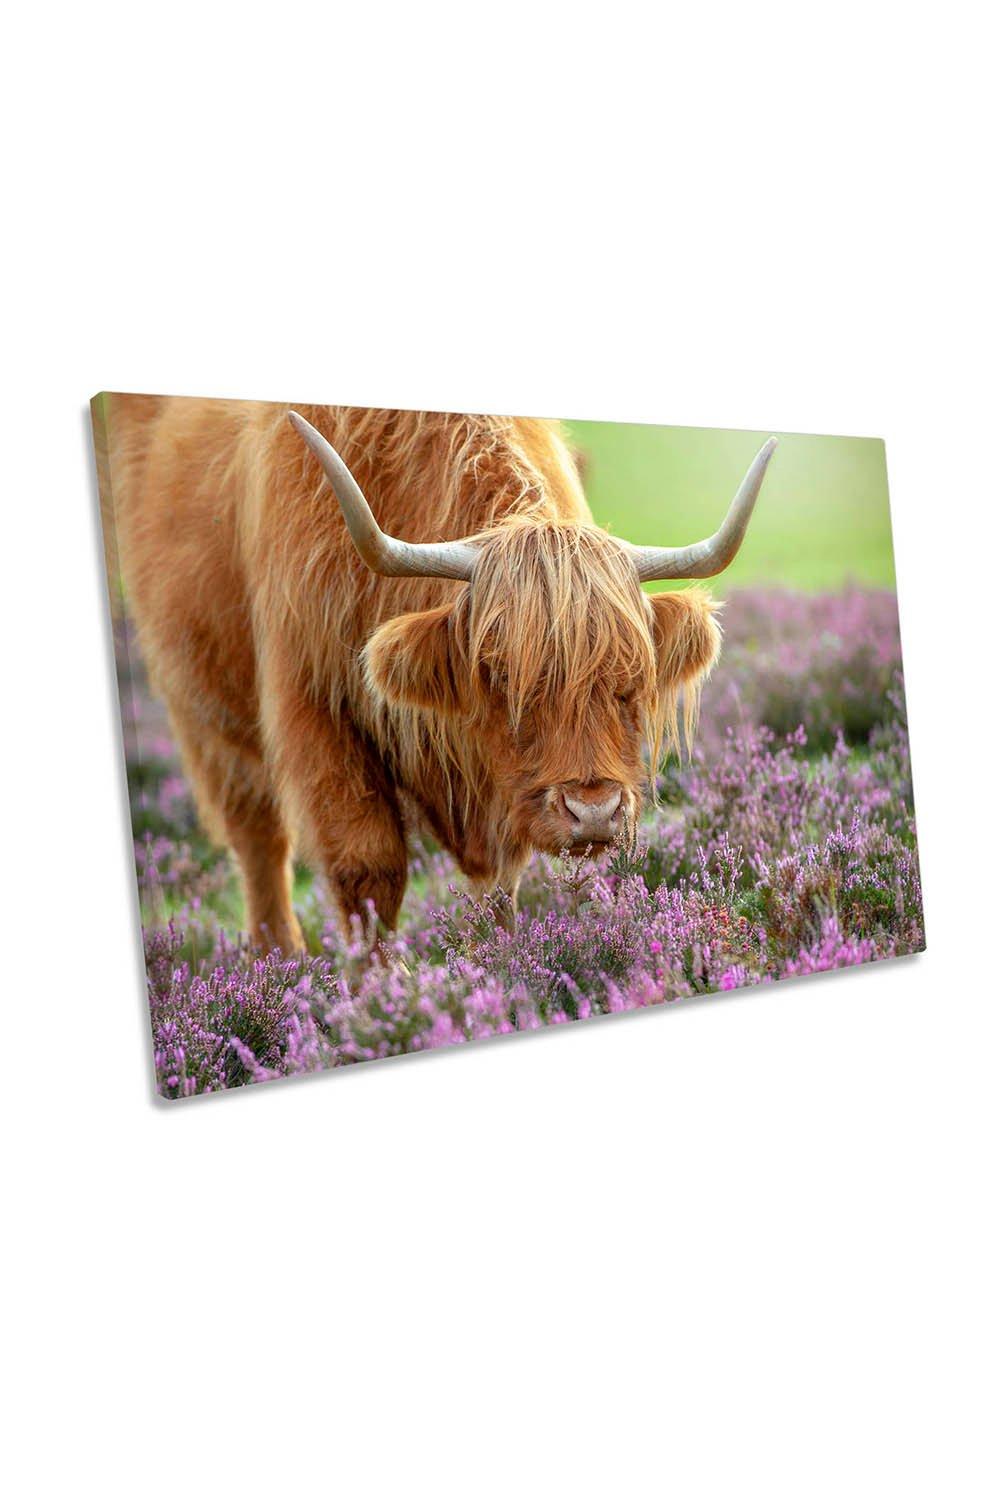 Highland Cow in Heather Scottish Canvas Wall Art Picture Print